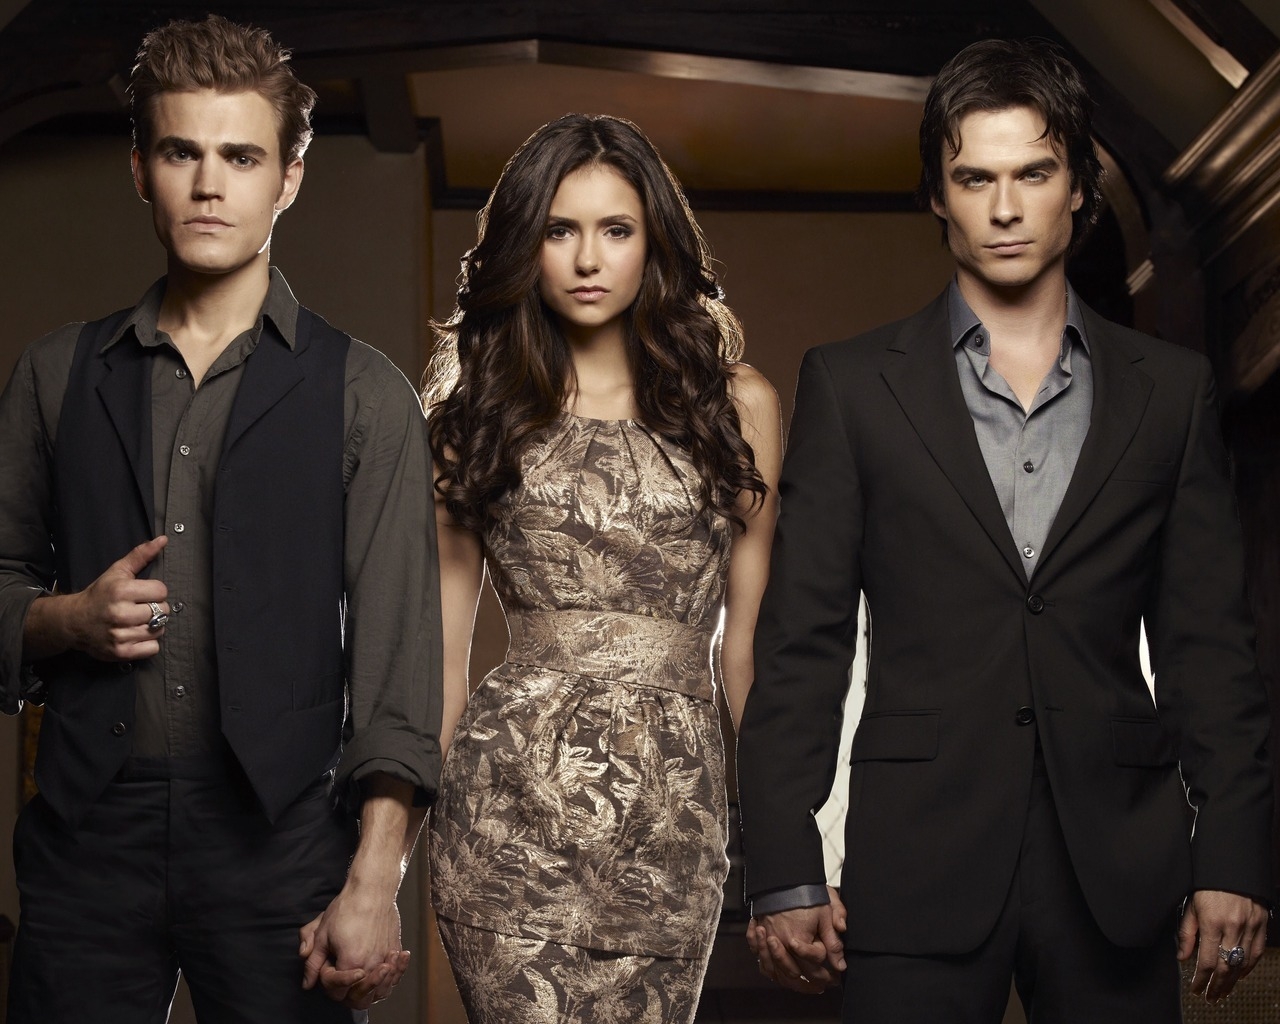 The Vampire Diaries Pics for 1280 x 1024 resolution